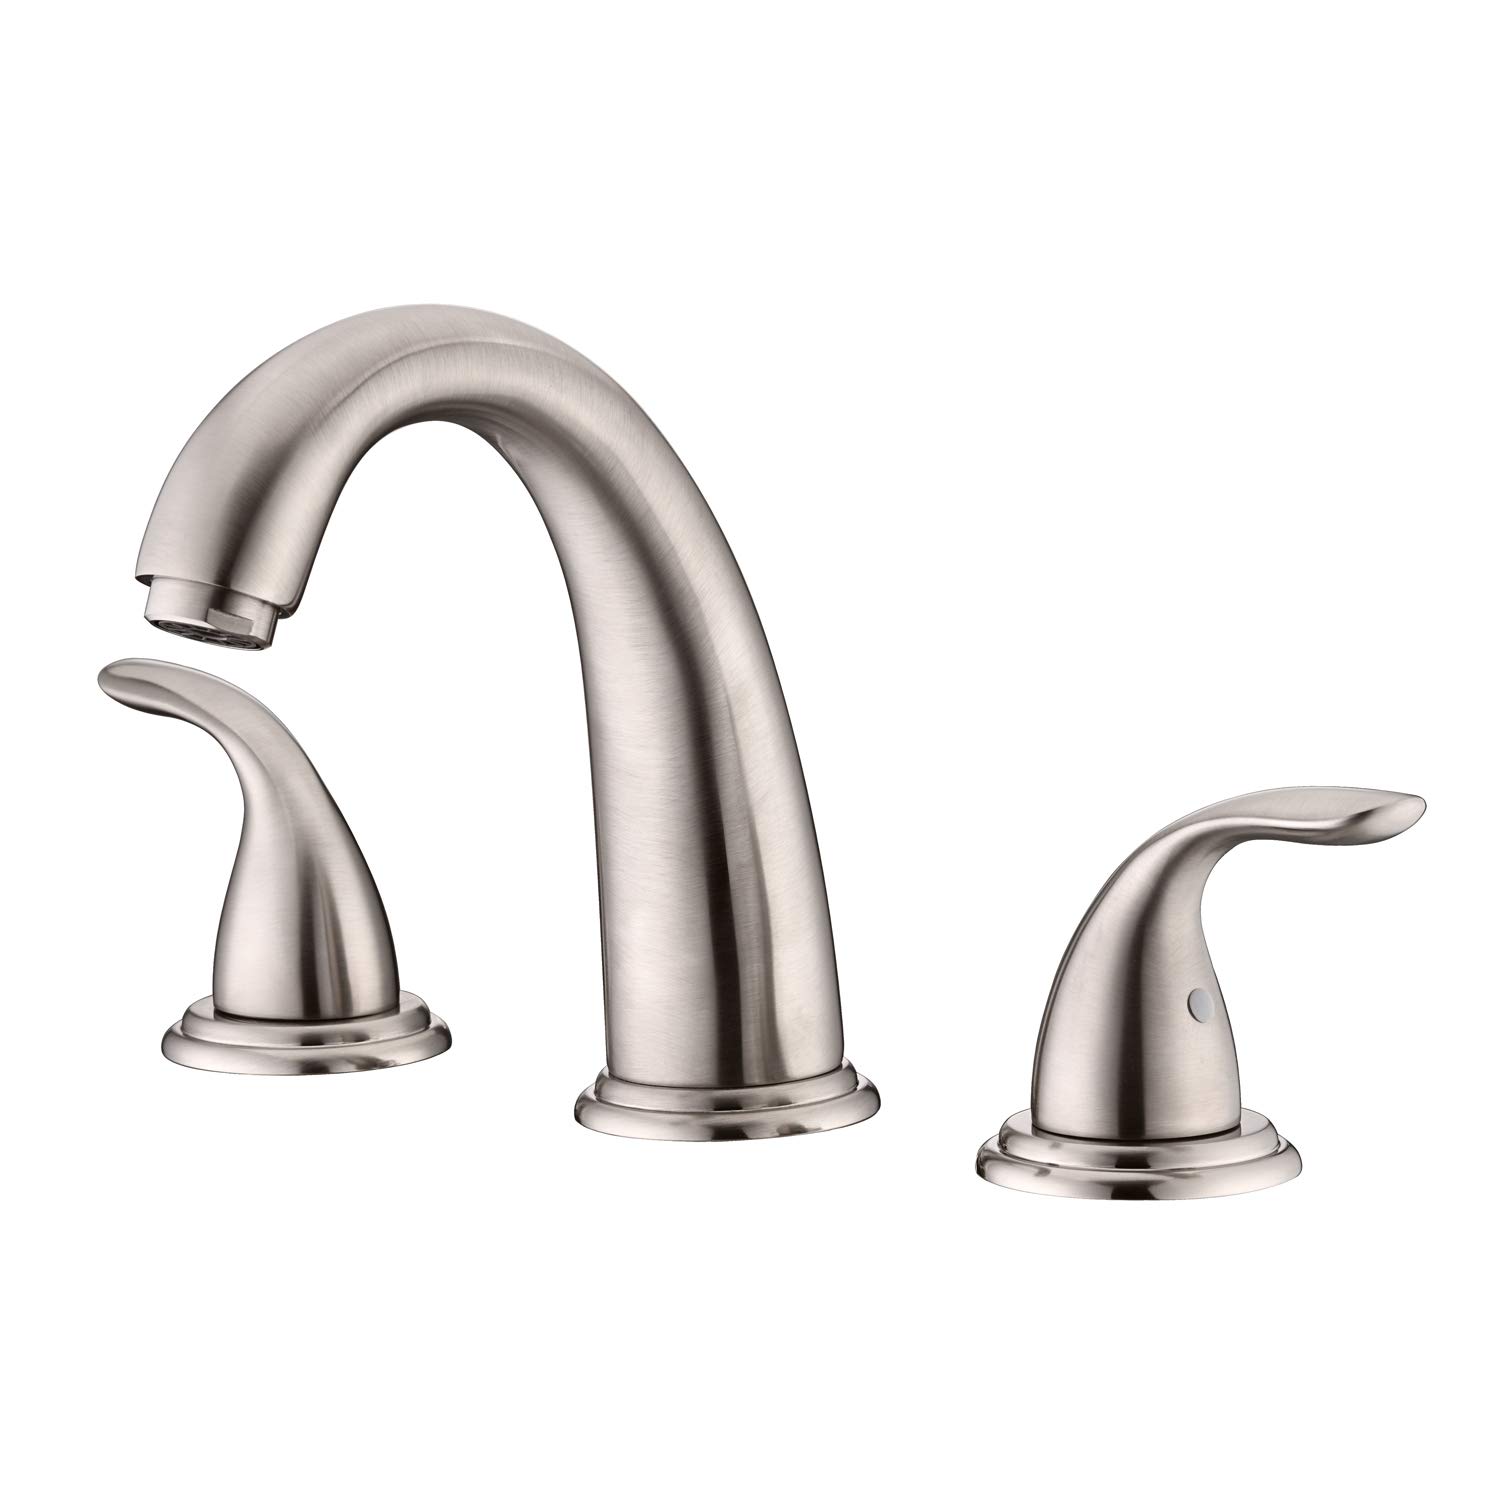 sumerain Two Handle Roman Tub Faucet Brushed Nickel with Valve, High Flow